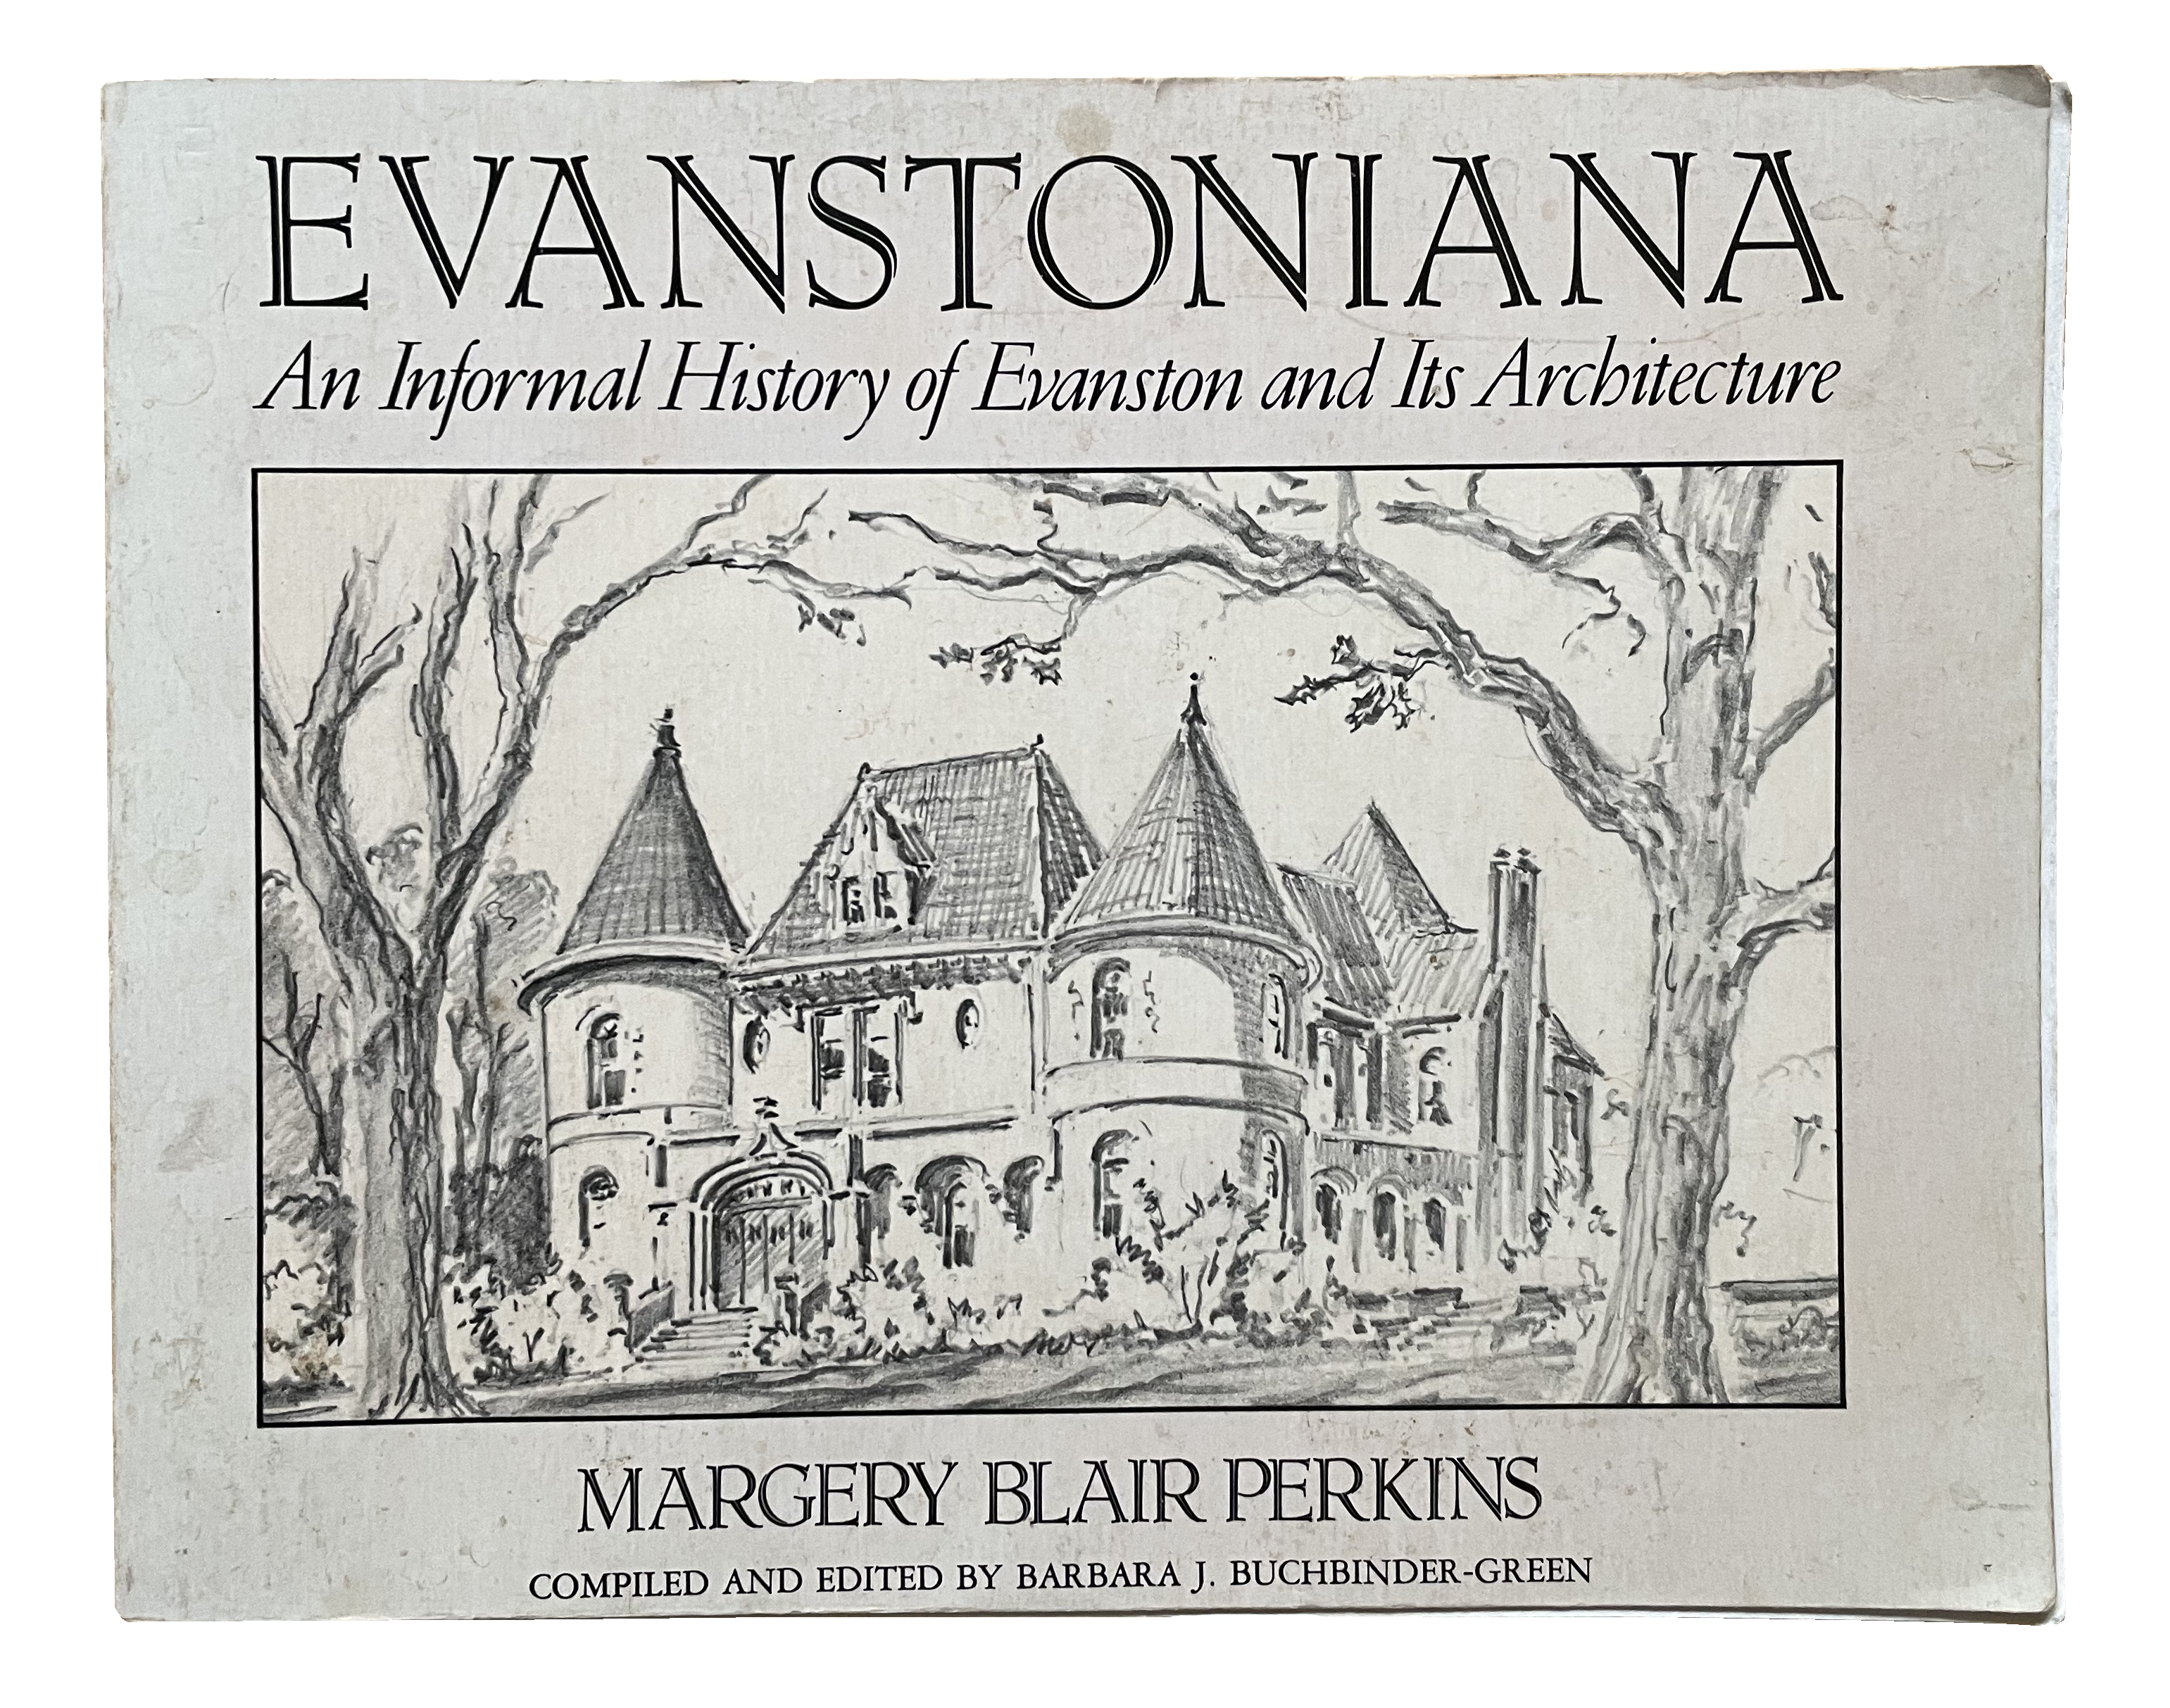 a photo of a book cover reading "EVANSTONIANA, An Informal History of Evanston and its Architecture." There is a drawing on the front of a house framed by two trees